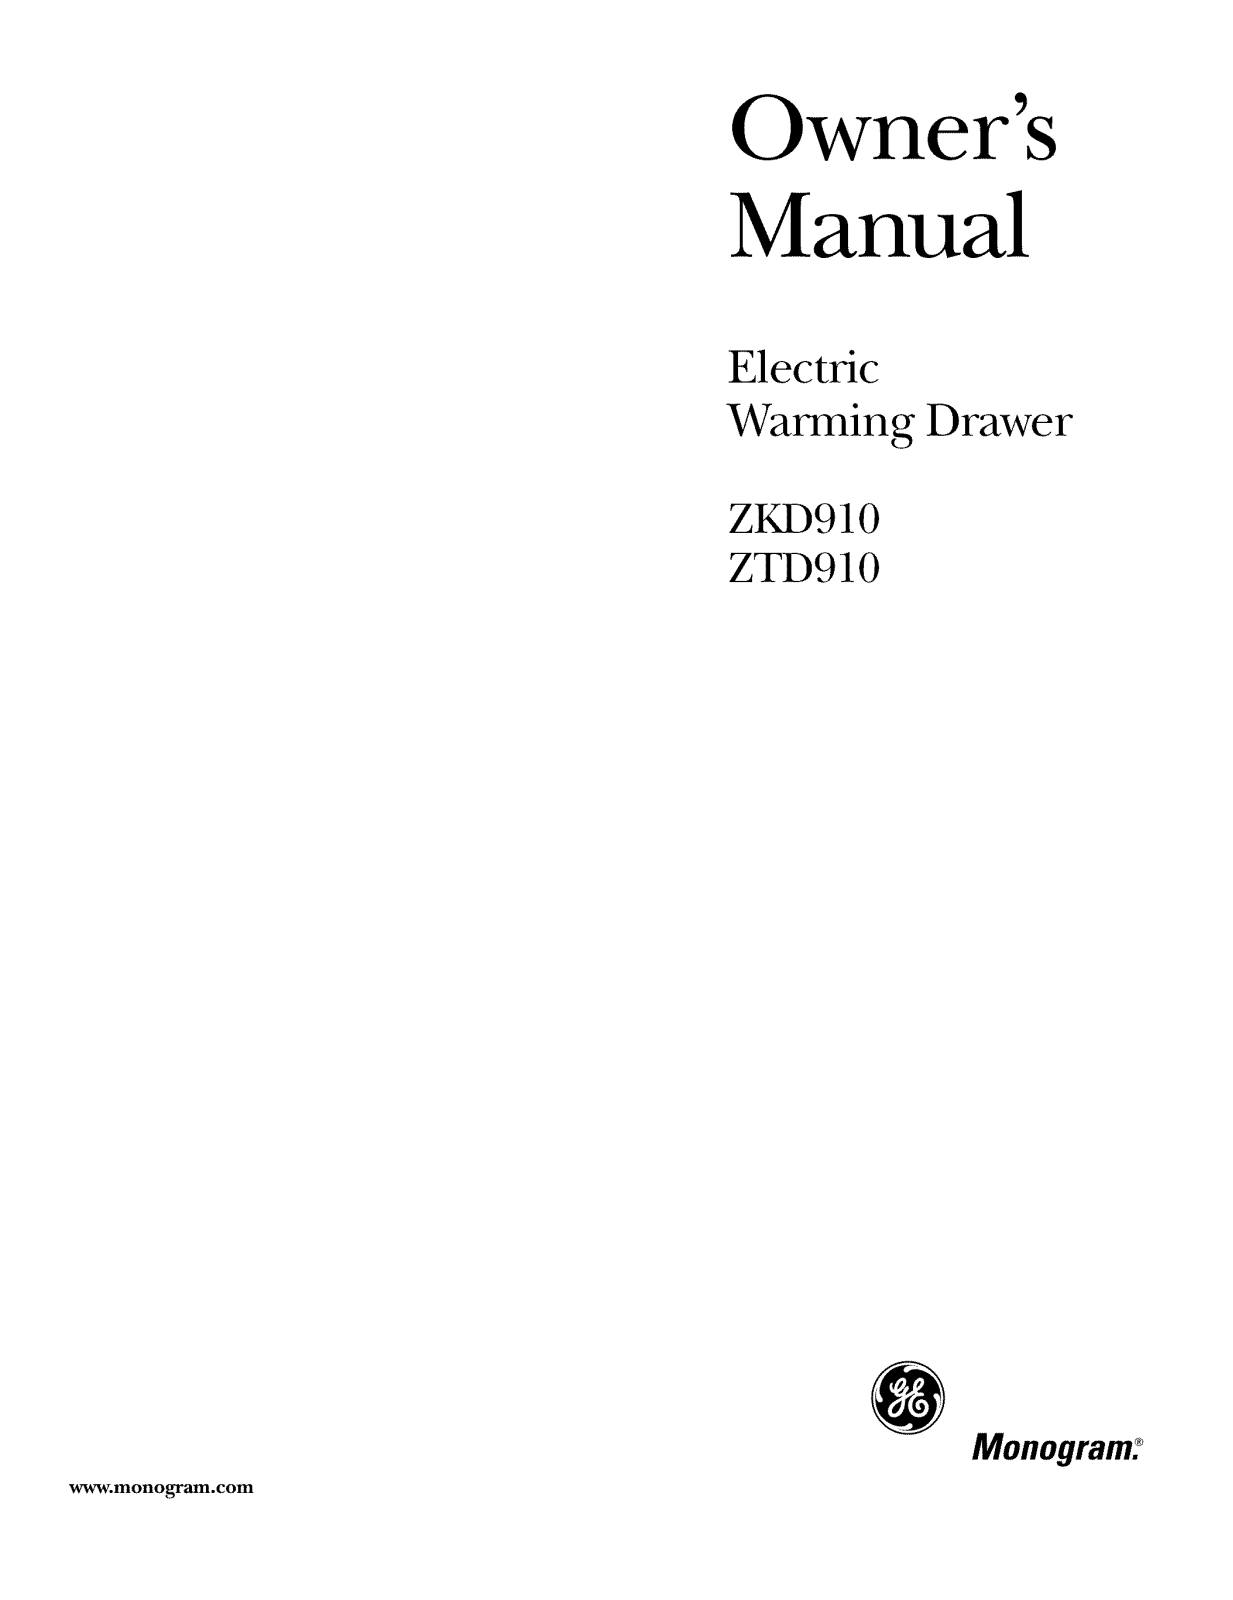 GE ZTD910WF3WW, ZTD910WF2WW, ZTD910WF1WW, ZTD910WB3WW, ZTD910SF3SS Owner’s Manual